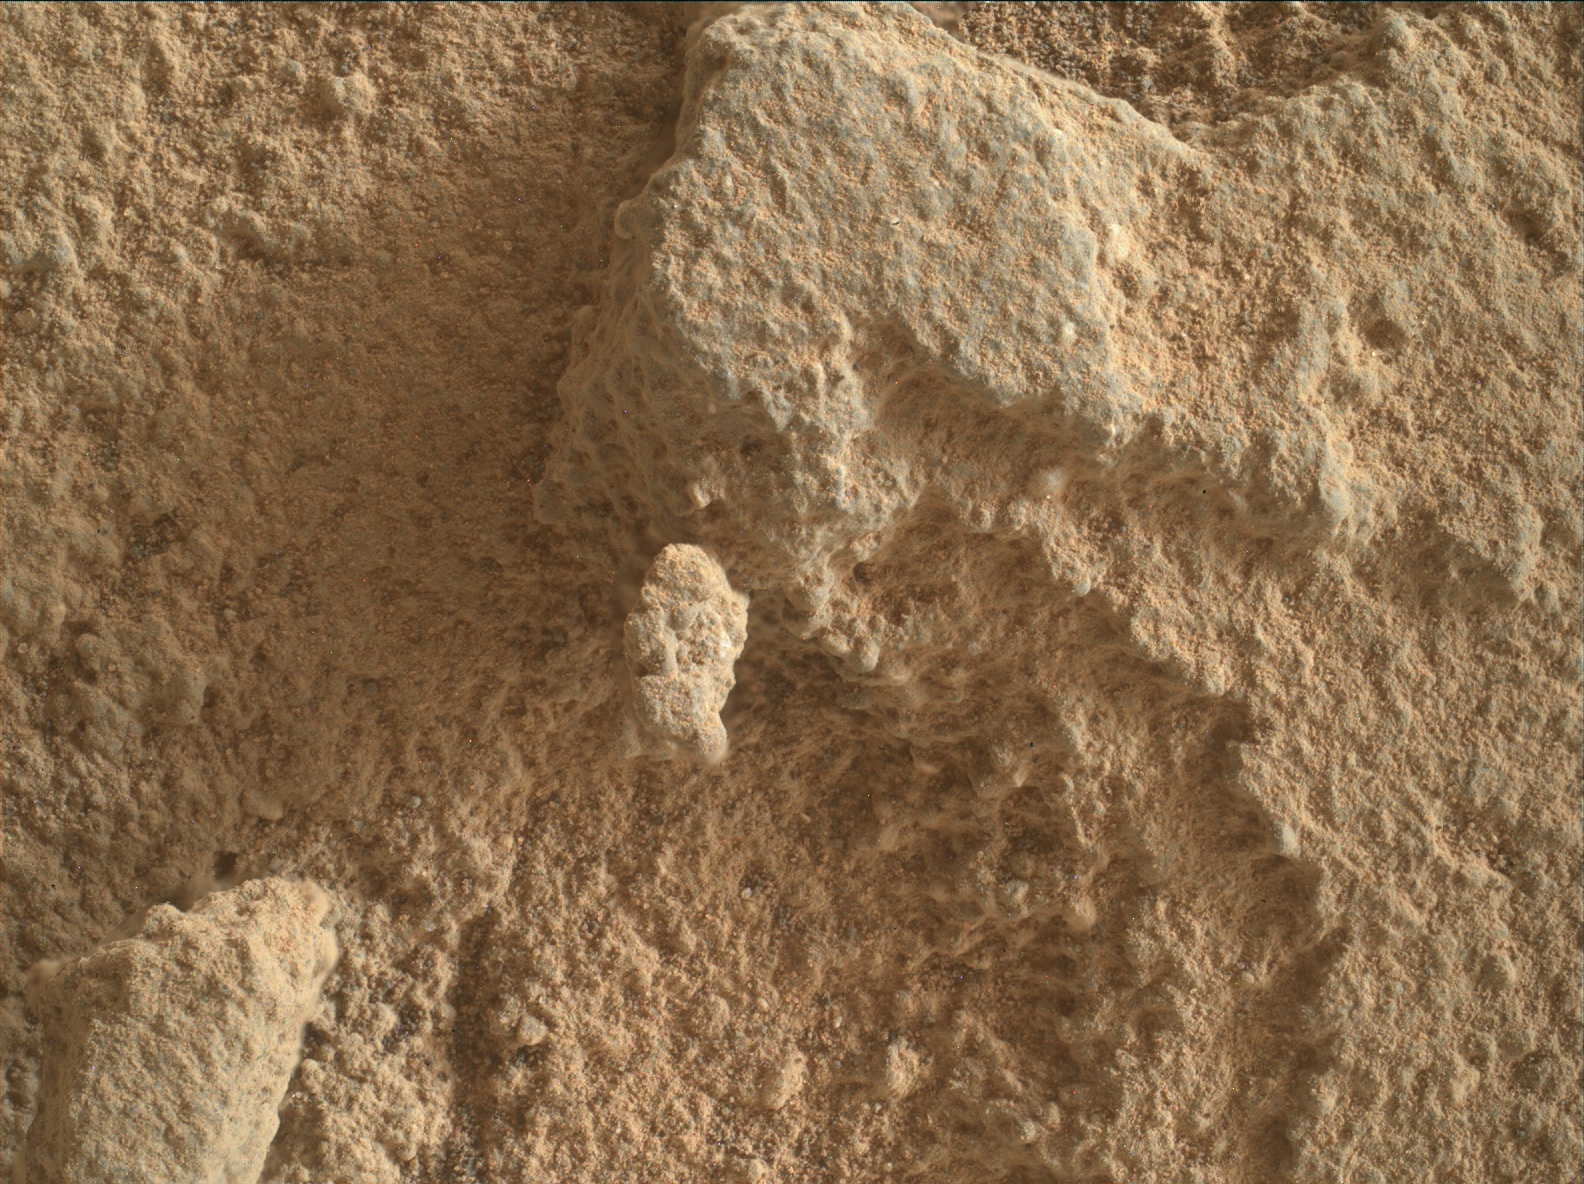 Nasa's Mars rover Curiosity acquired this image using its Mars Hand Lens Imager (MAHLI) on Sol 2734